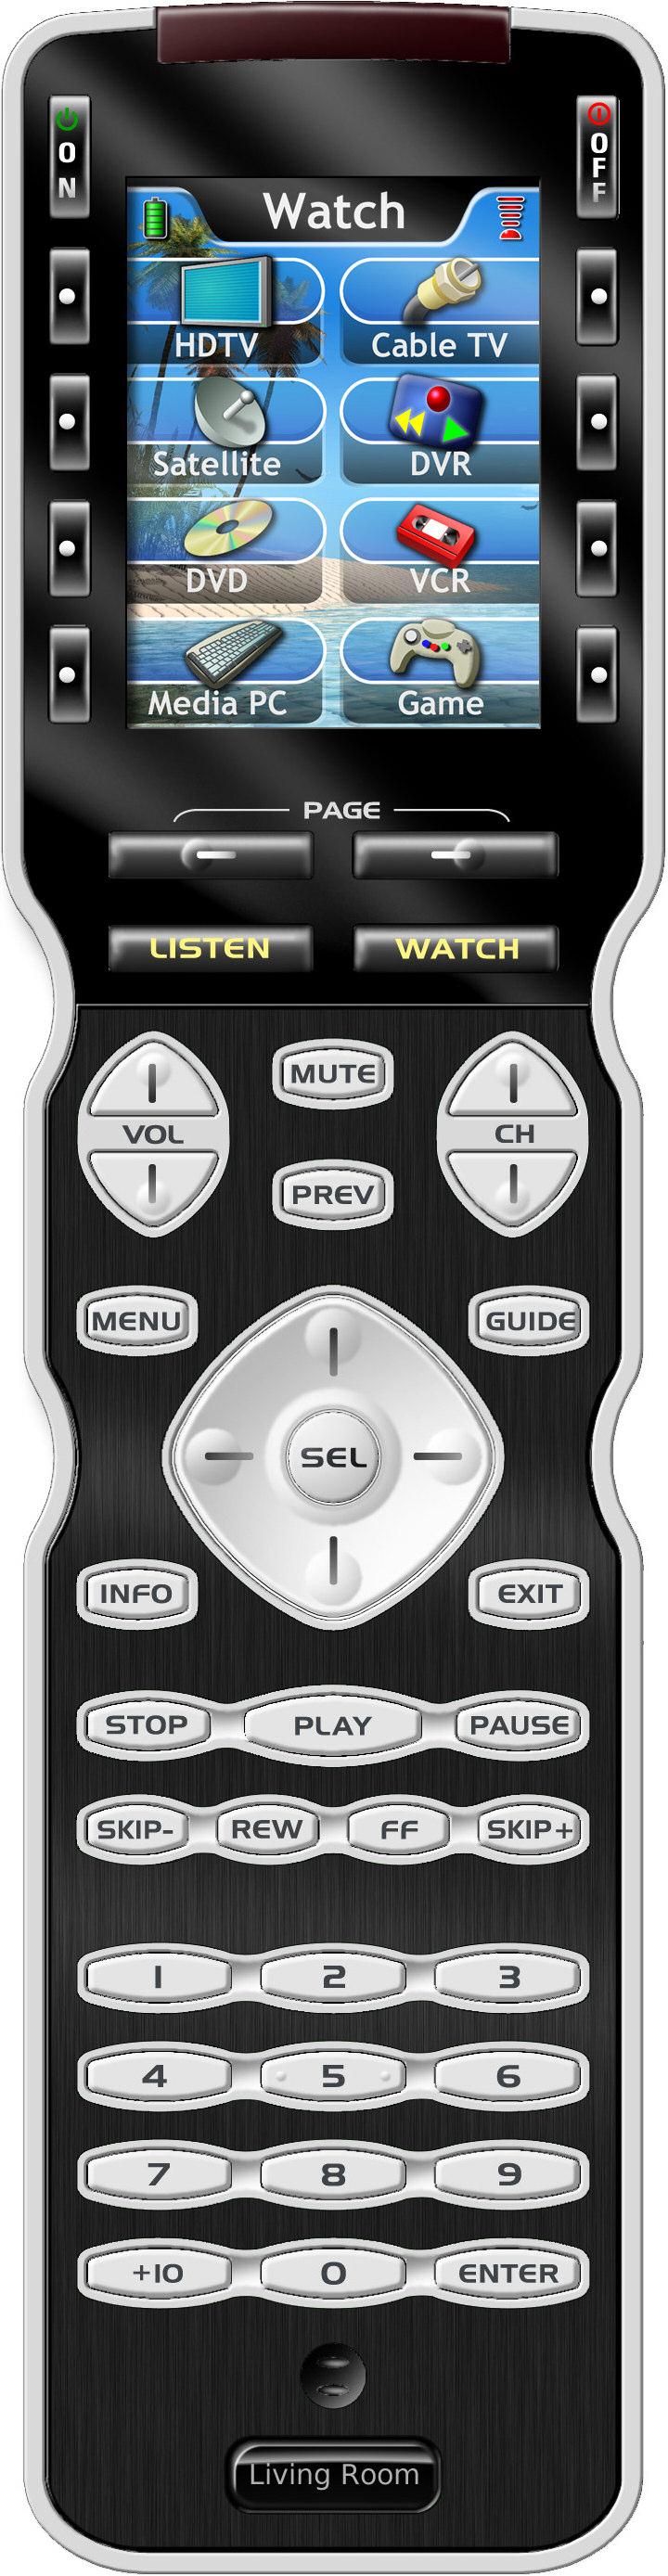 Displaying the Setup Screens You can adjust the settings of the MX-980 whenever you like by pressing and holding both the WATCH and the ENTER button at the same time for three seconds.